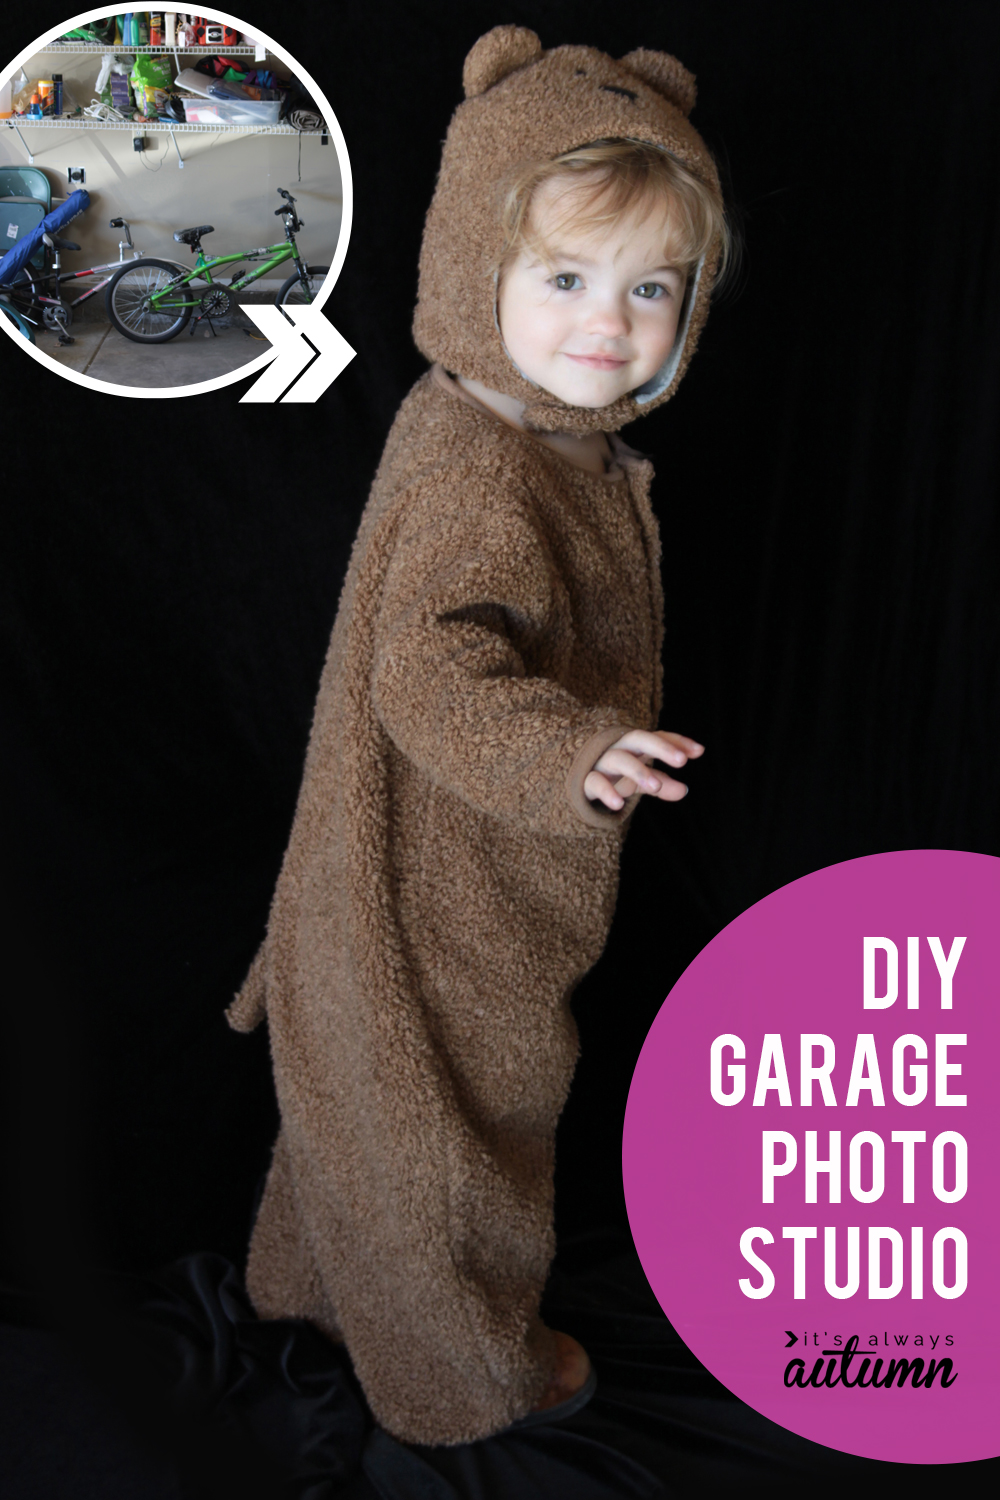 If you want great photos using natural light, set up a simple garage photo studio. All you need is some black fabric!